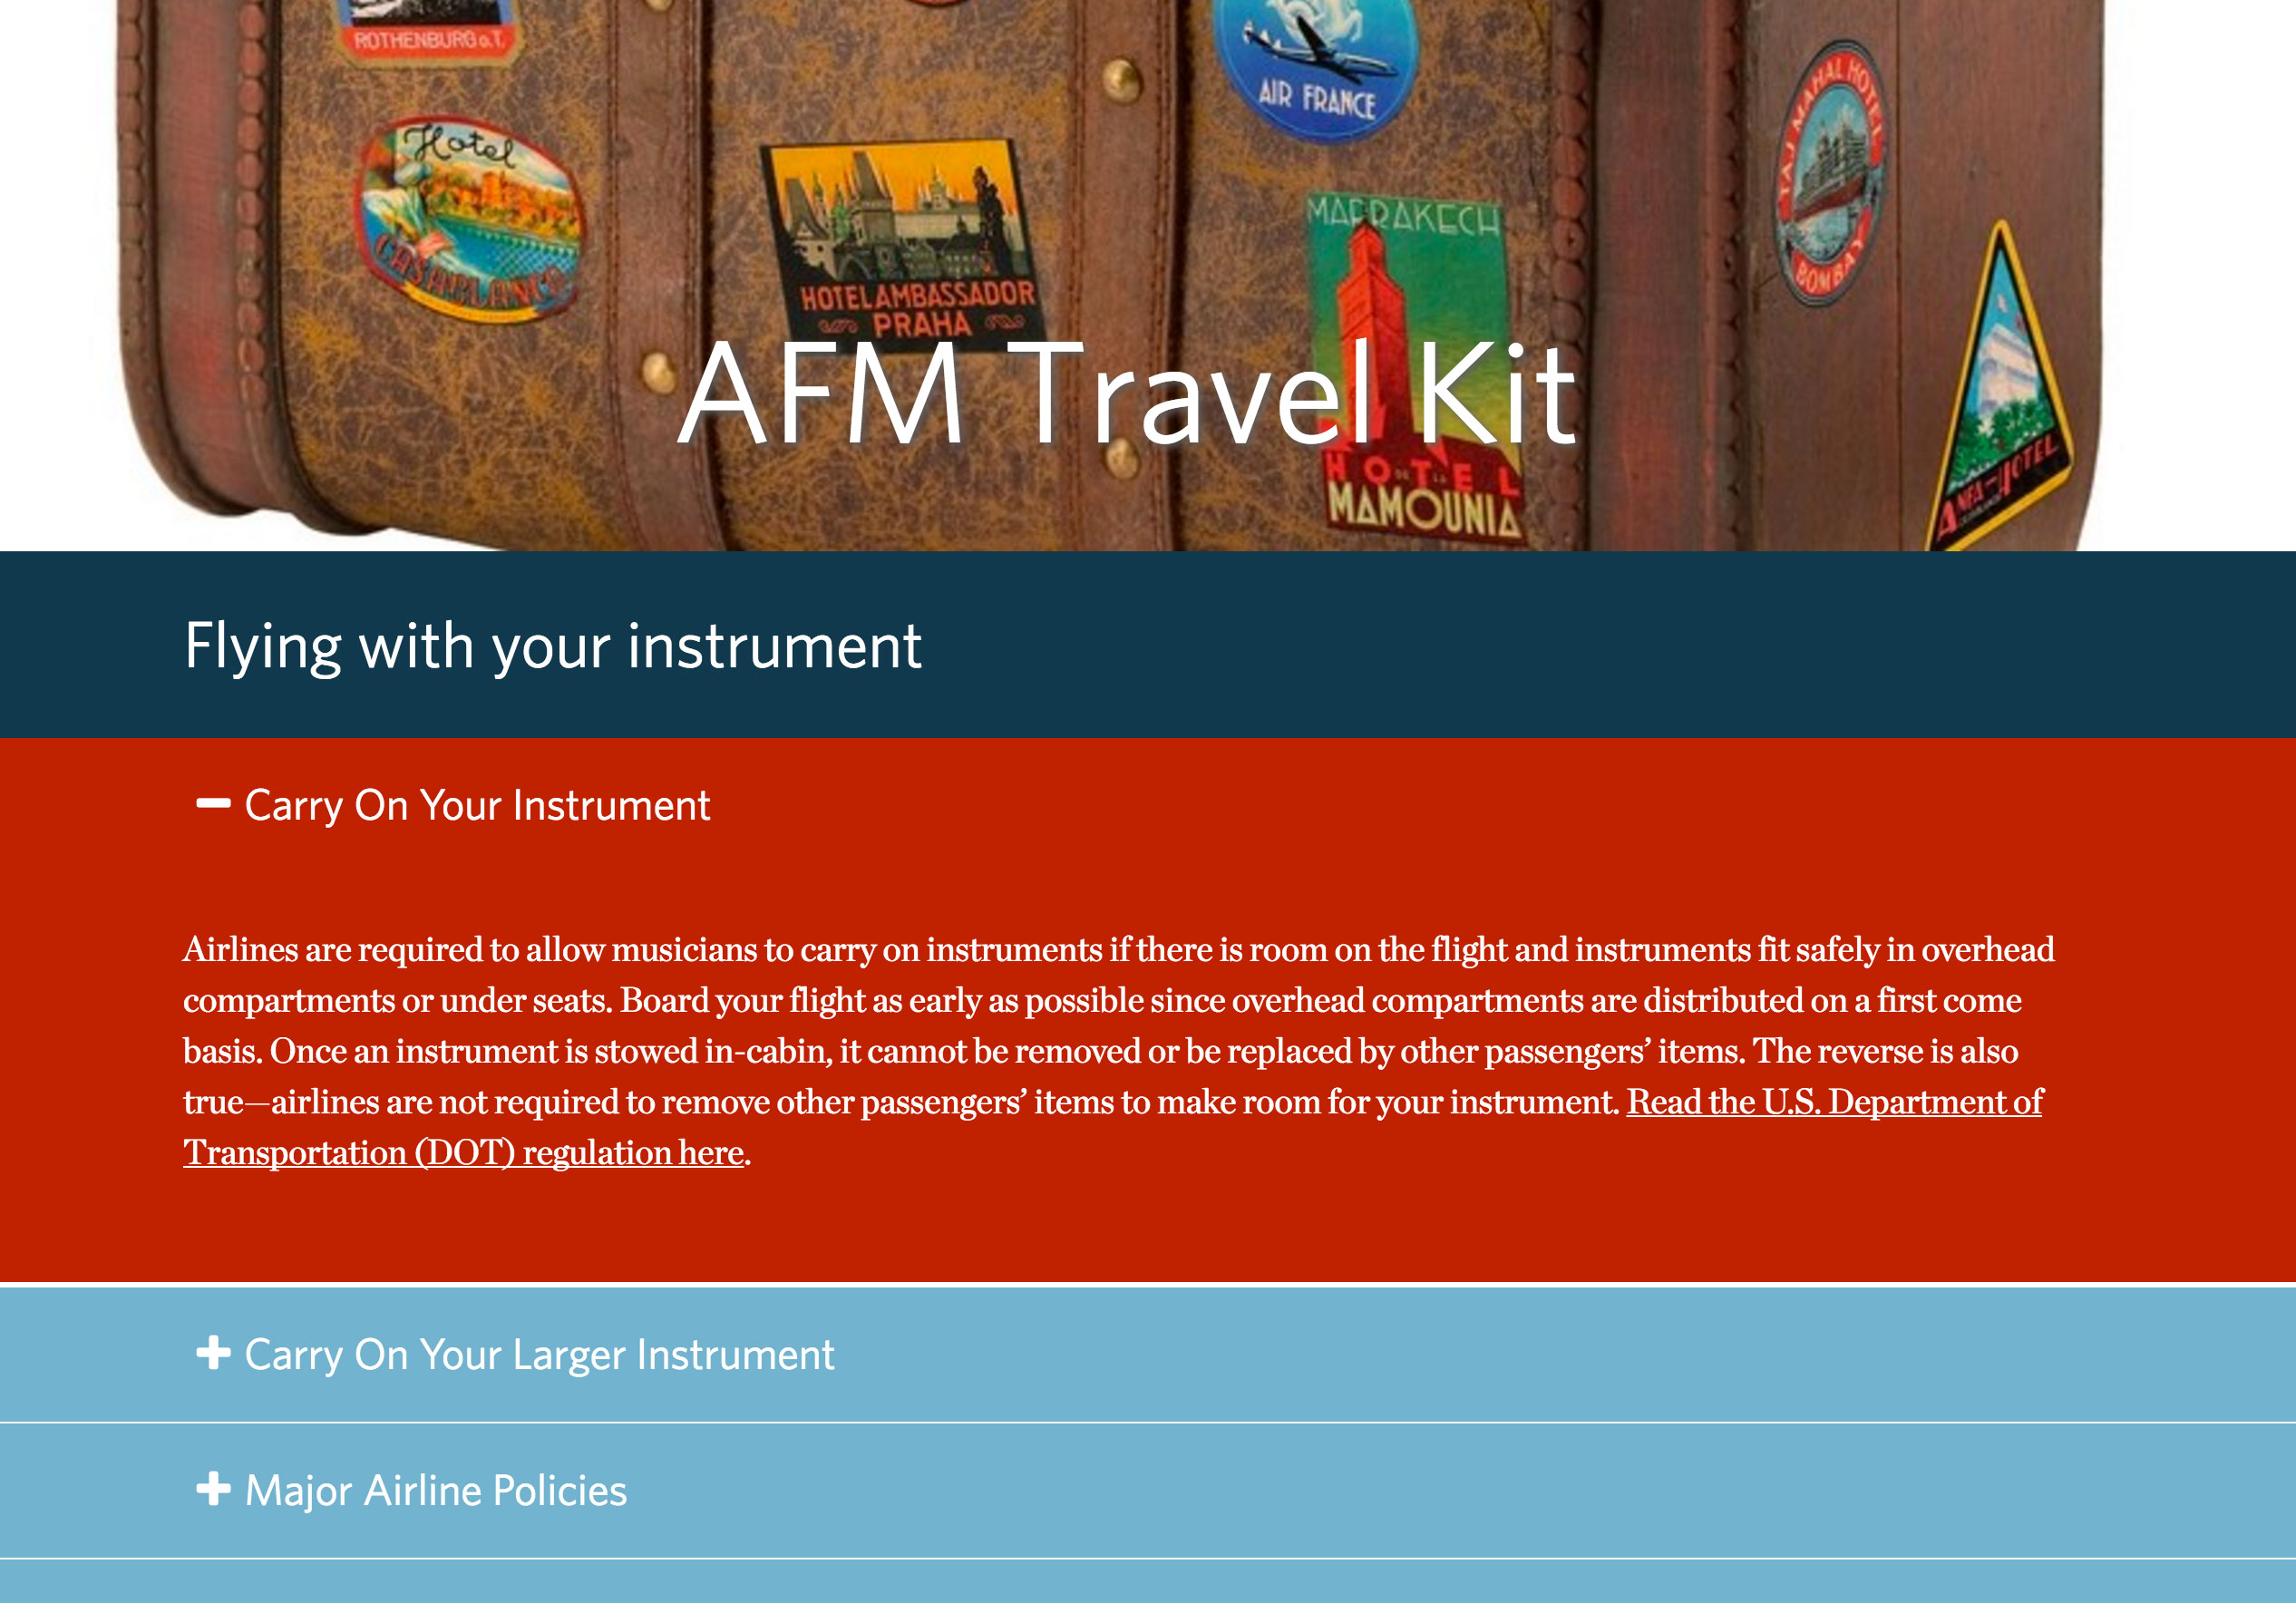 American Federation of Musicians (AFM): Travel Kit